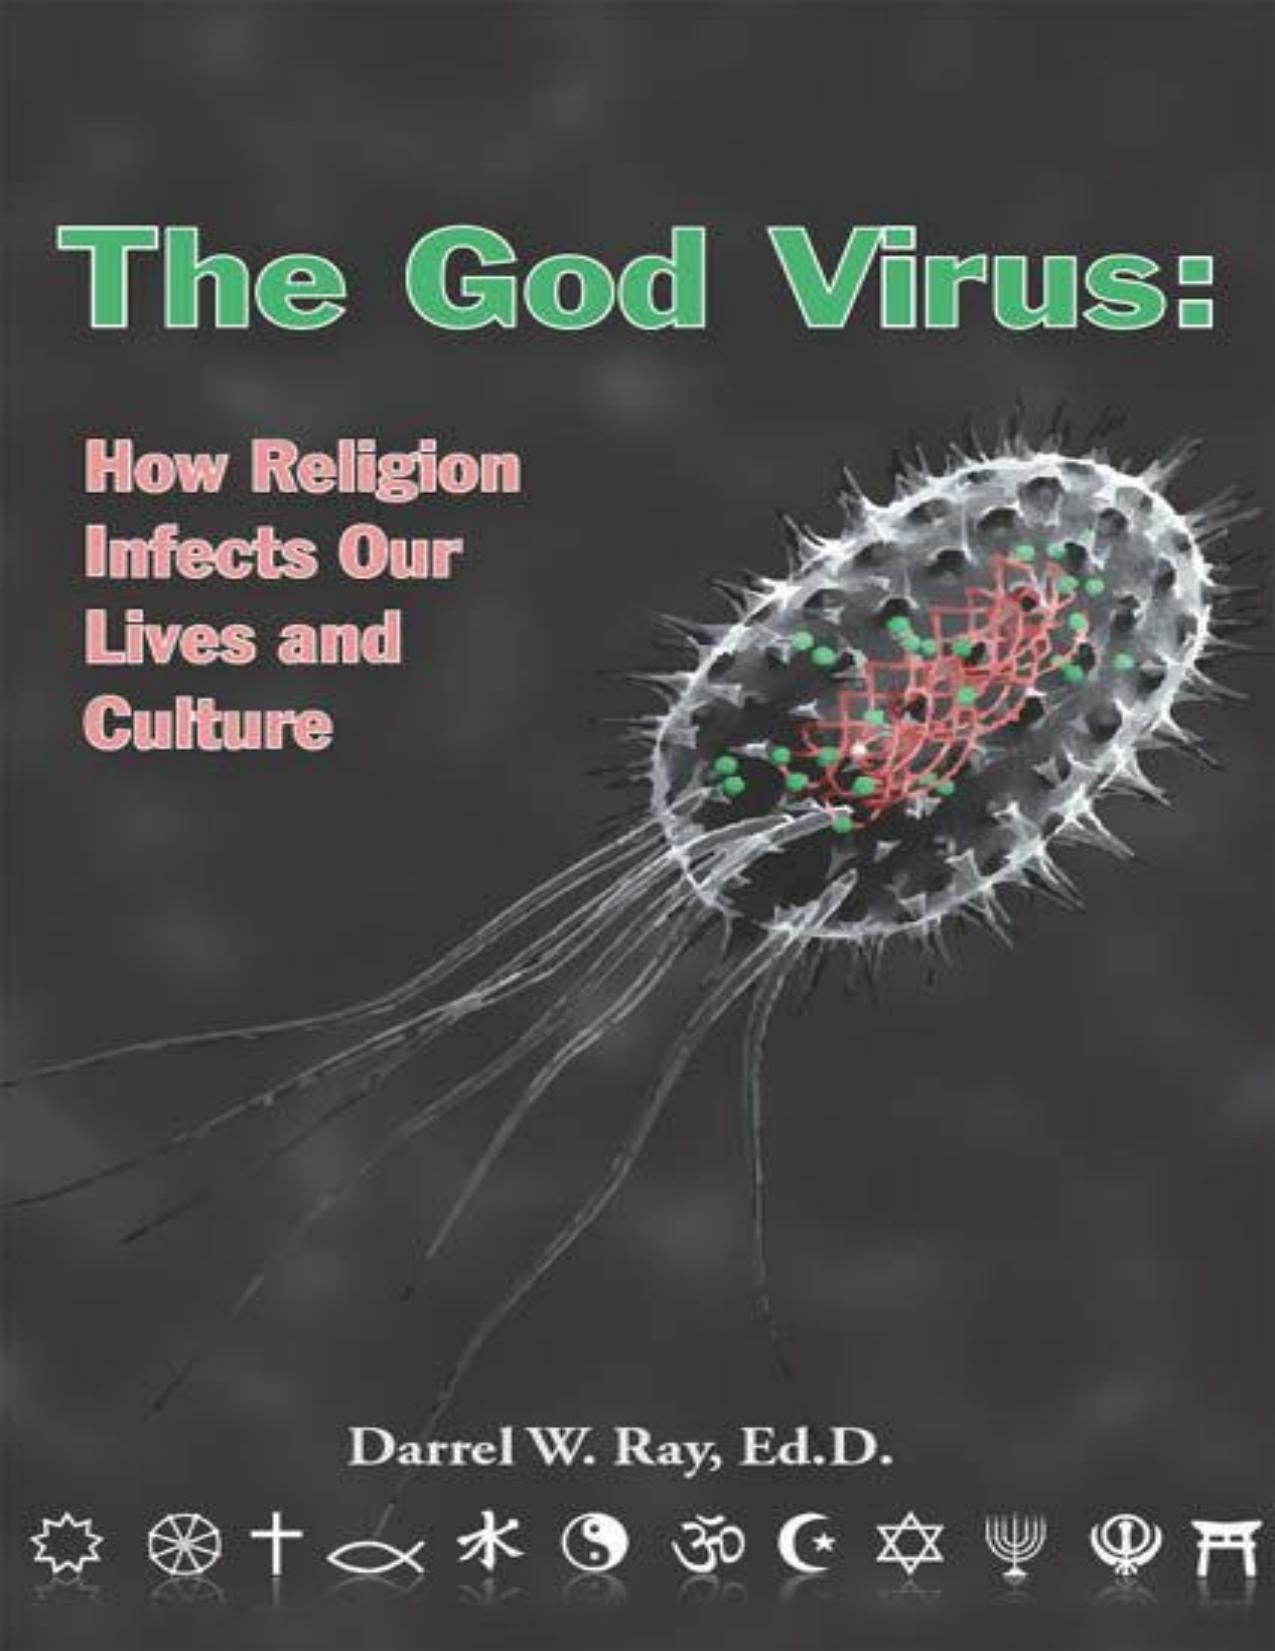 The God Virus: How Religion Infects Our Lives and Culture - PDFDrive.com